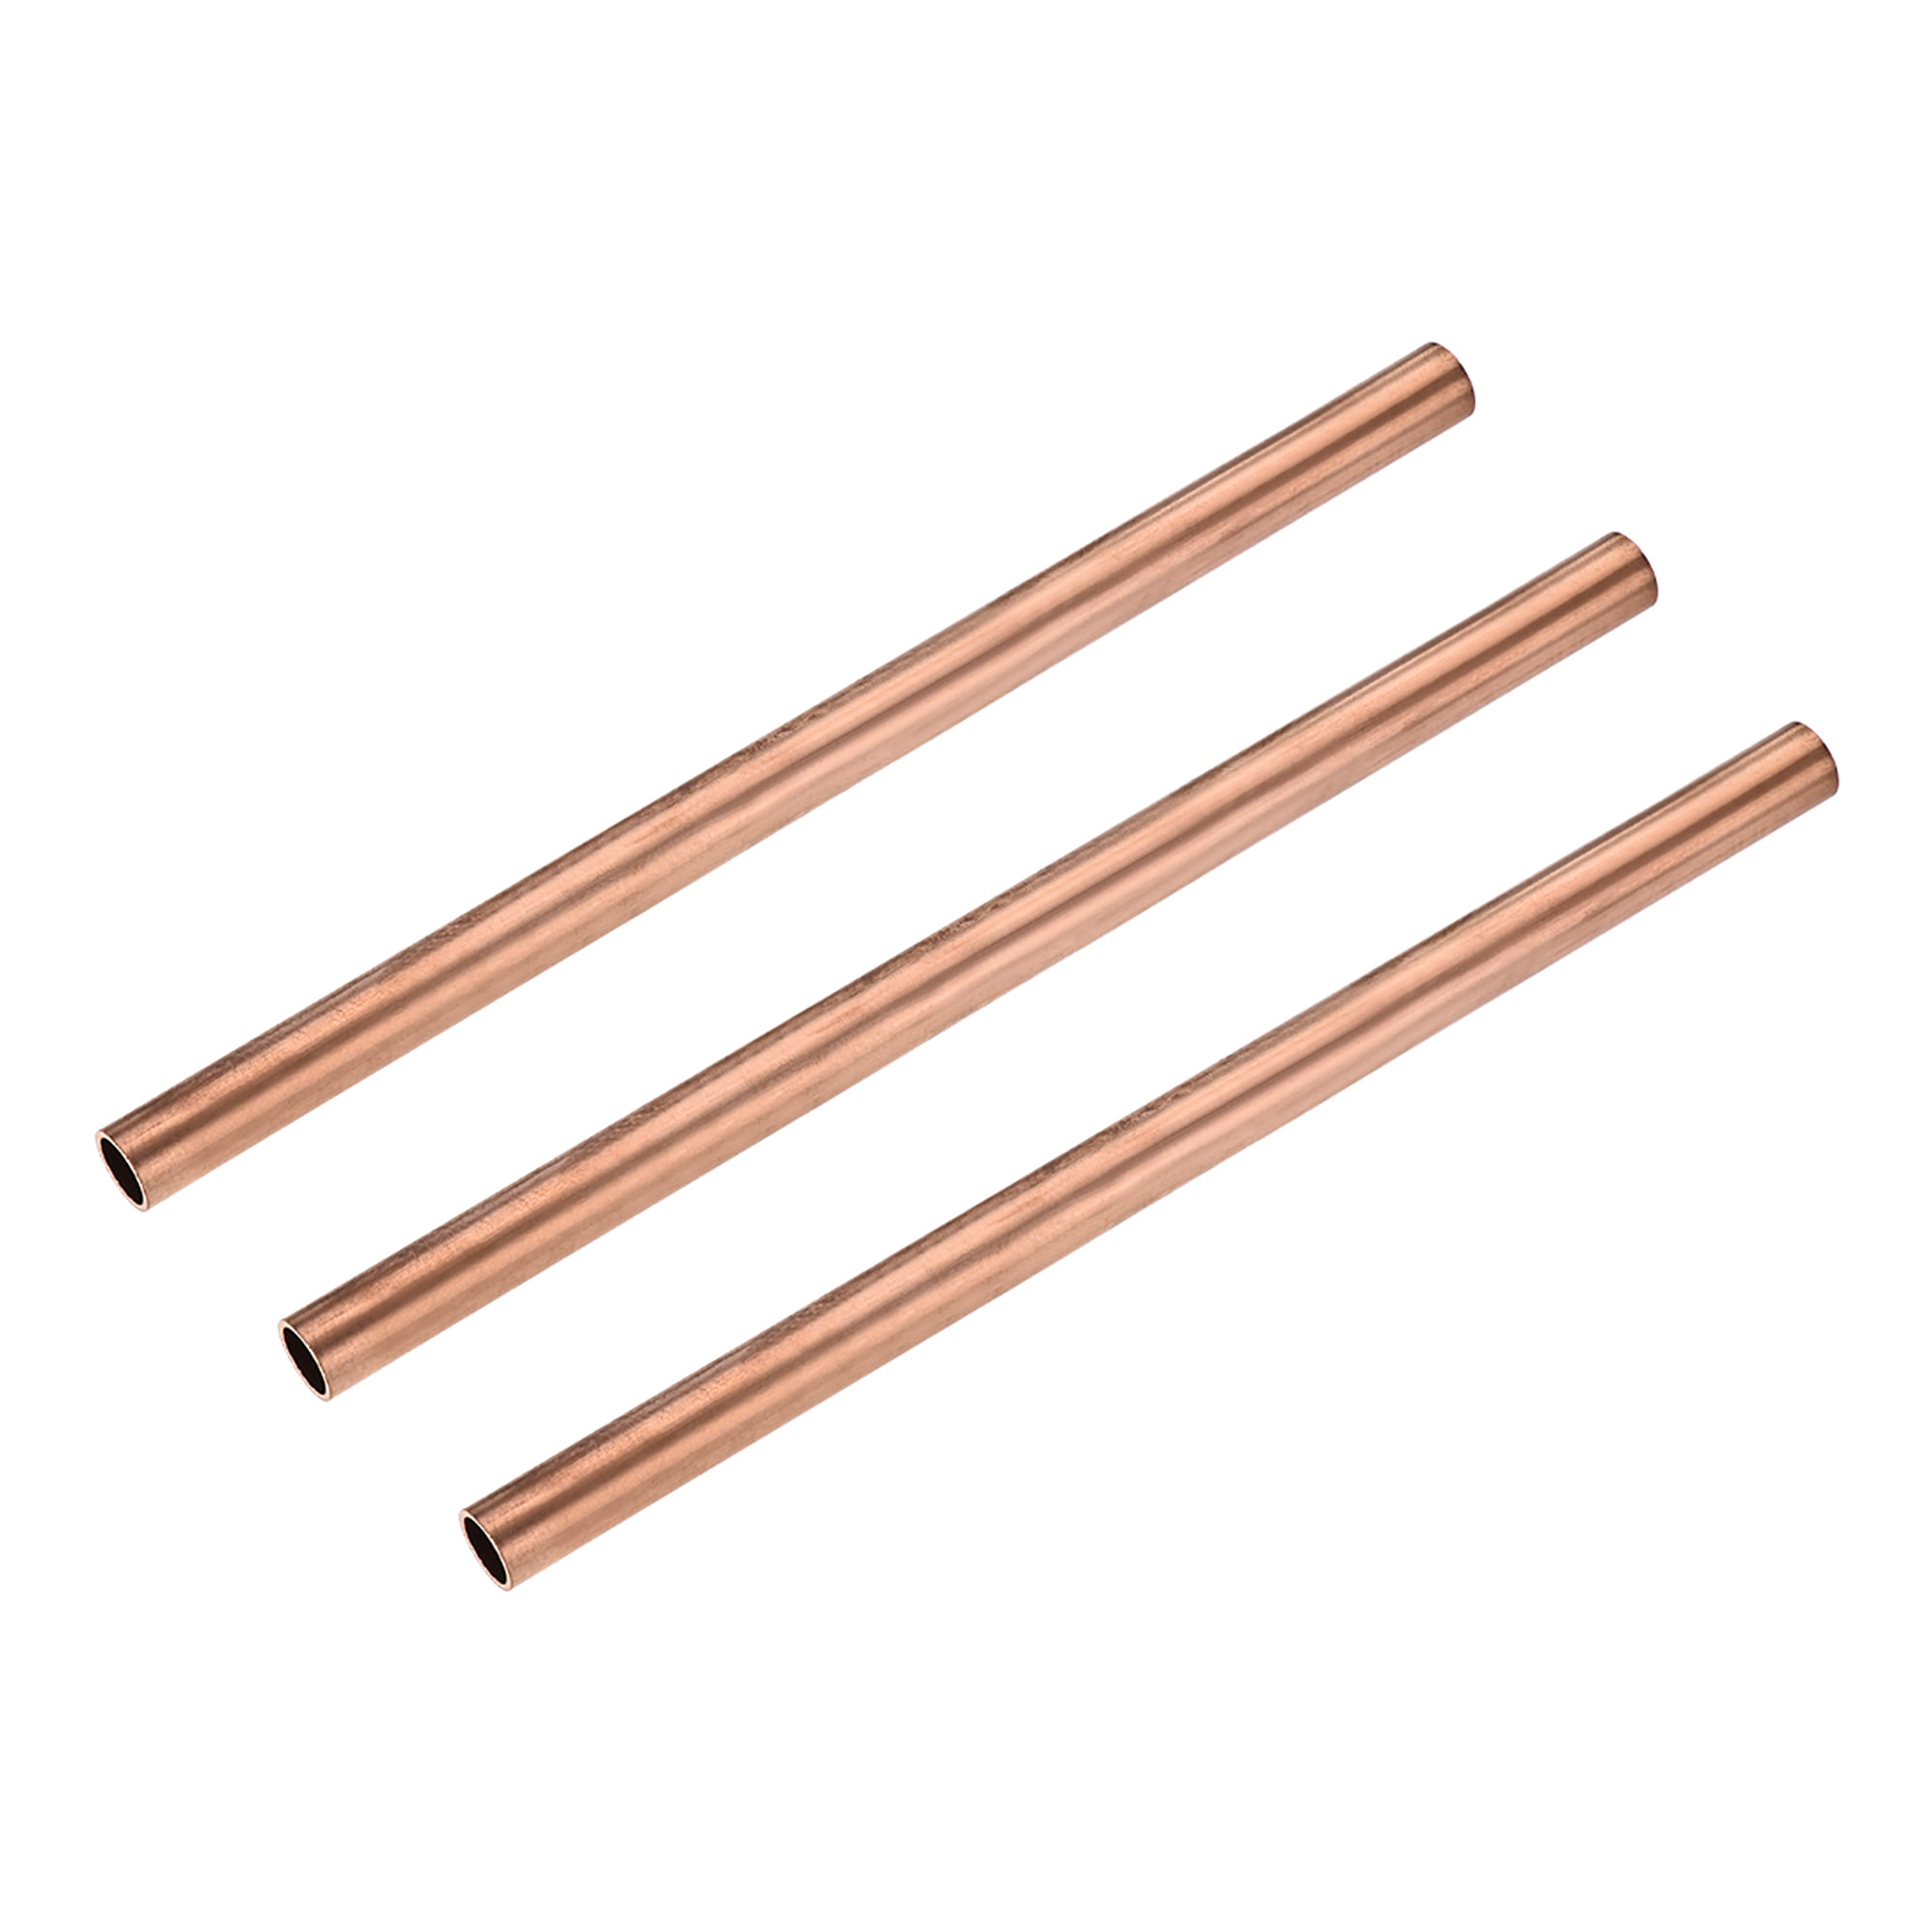 Copper Round Tube 11mm OD 1mm Wall Thickness 200mm Length Pipe Tubing 